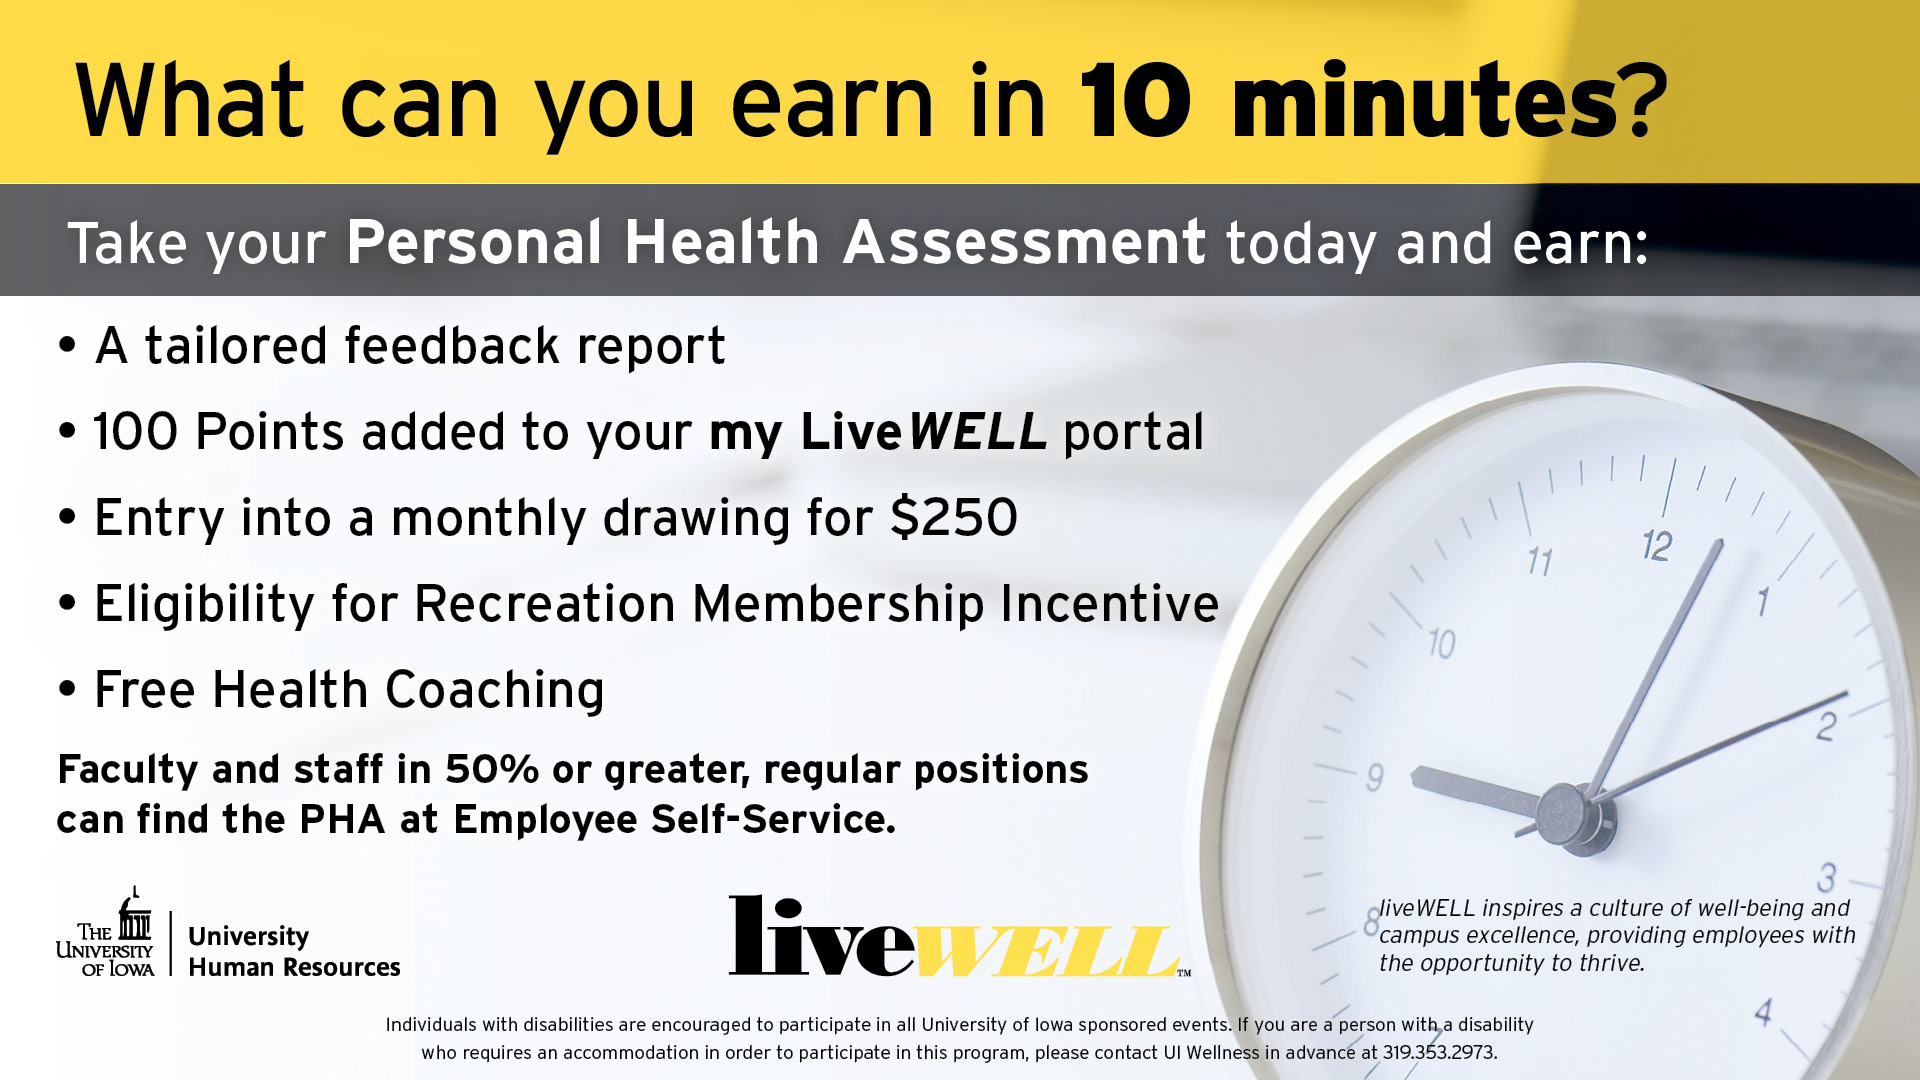 Take Your Personal Health Assessment Today!